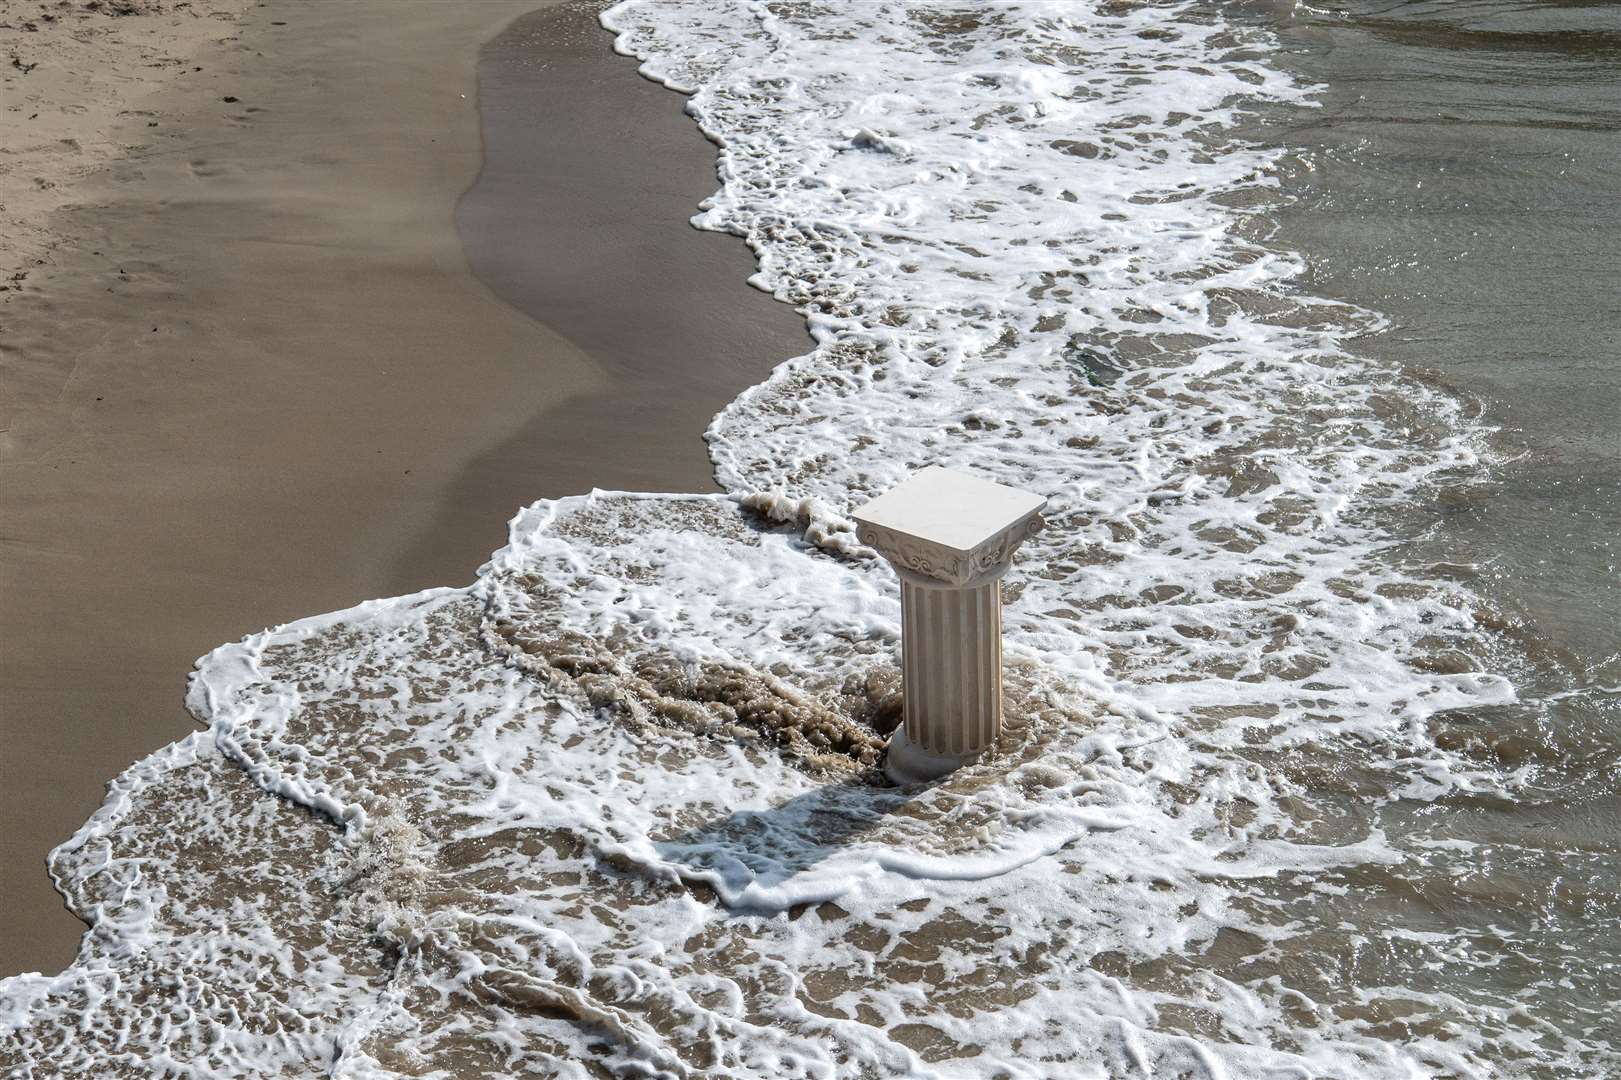 There's a plinth on the beach at Folkestone Picture: Matt Crossick/PA Wire